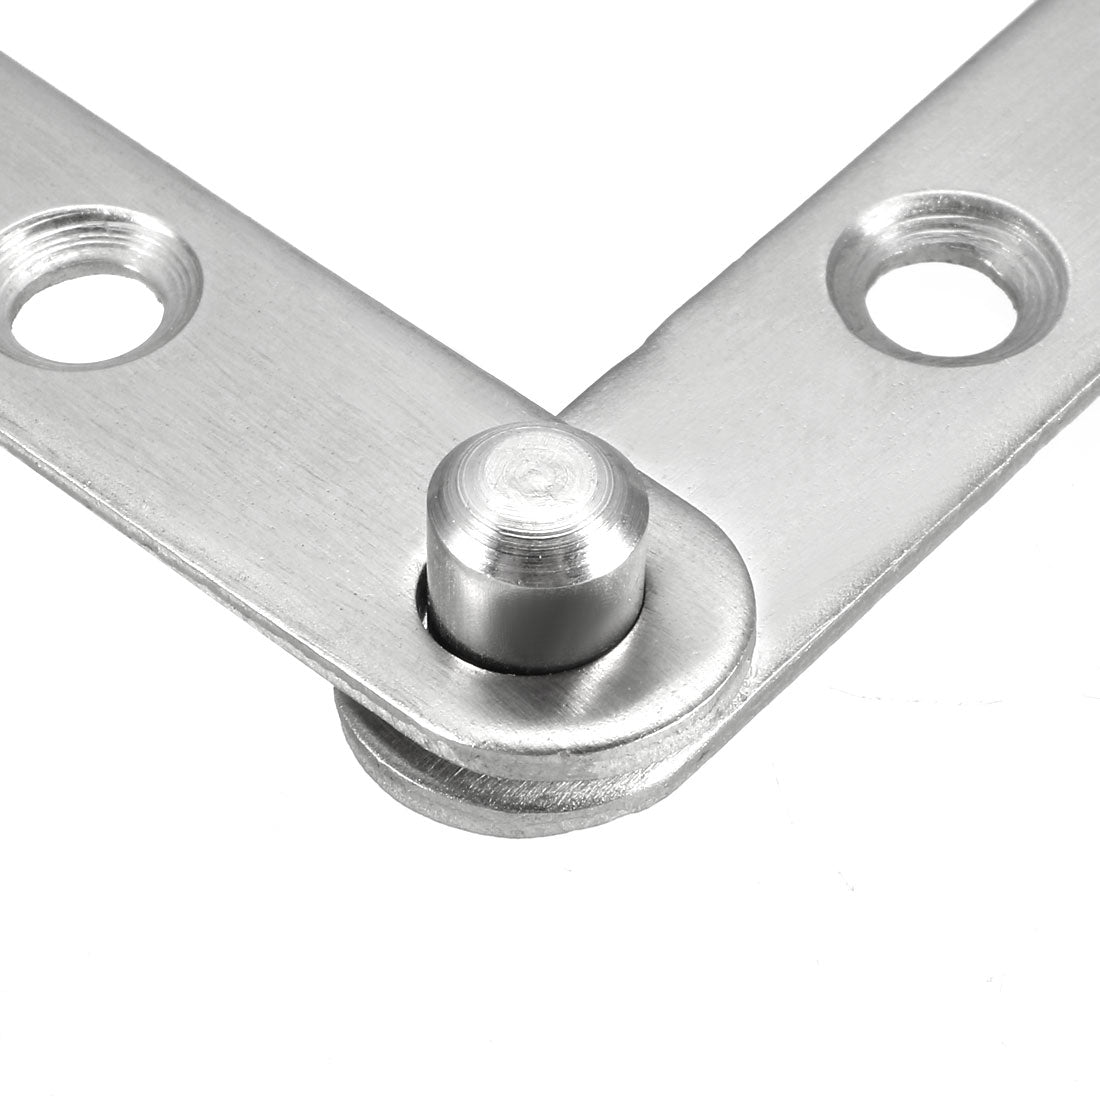 uxcell Uxcell Door Pivot Hinge, 58mmx11mmx9mm Stainless Steel 360 Degree Rotating 10pcs